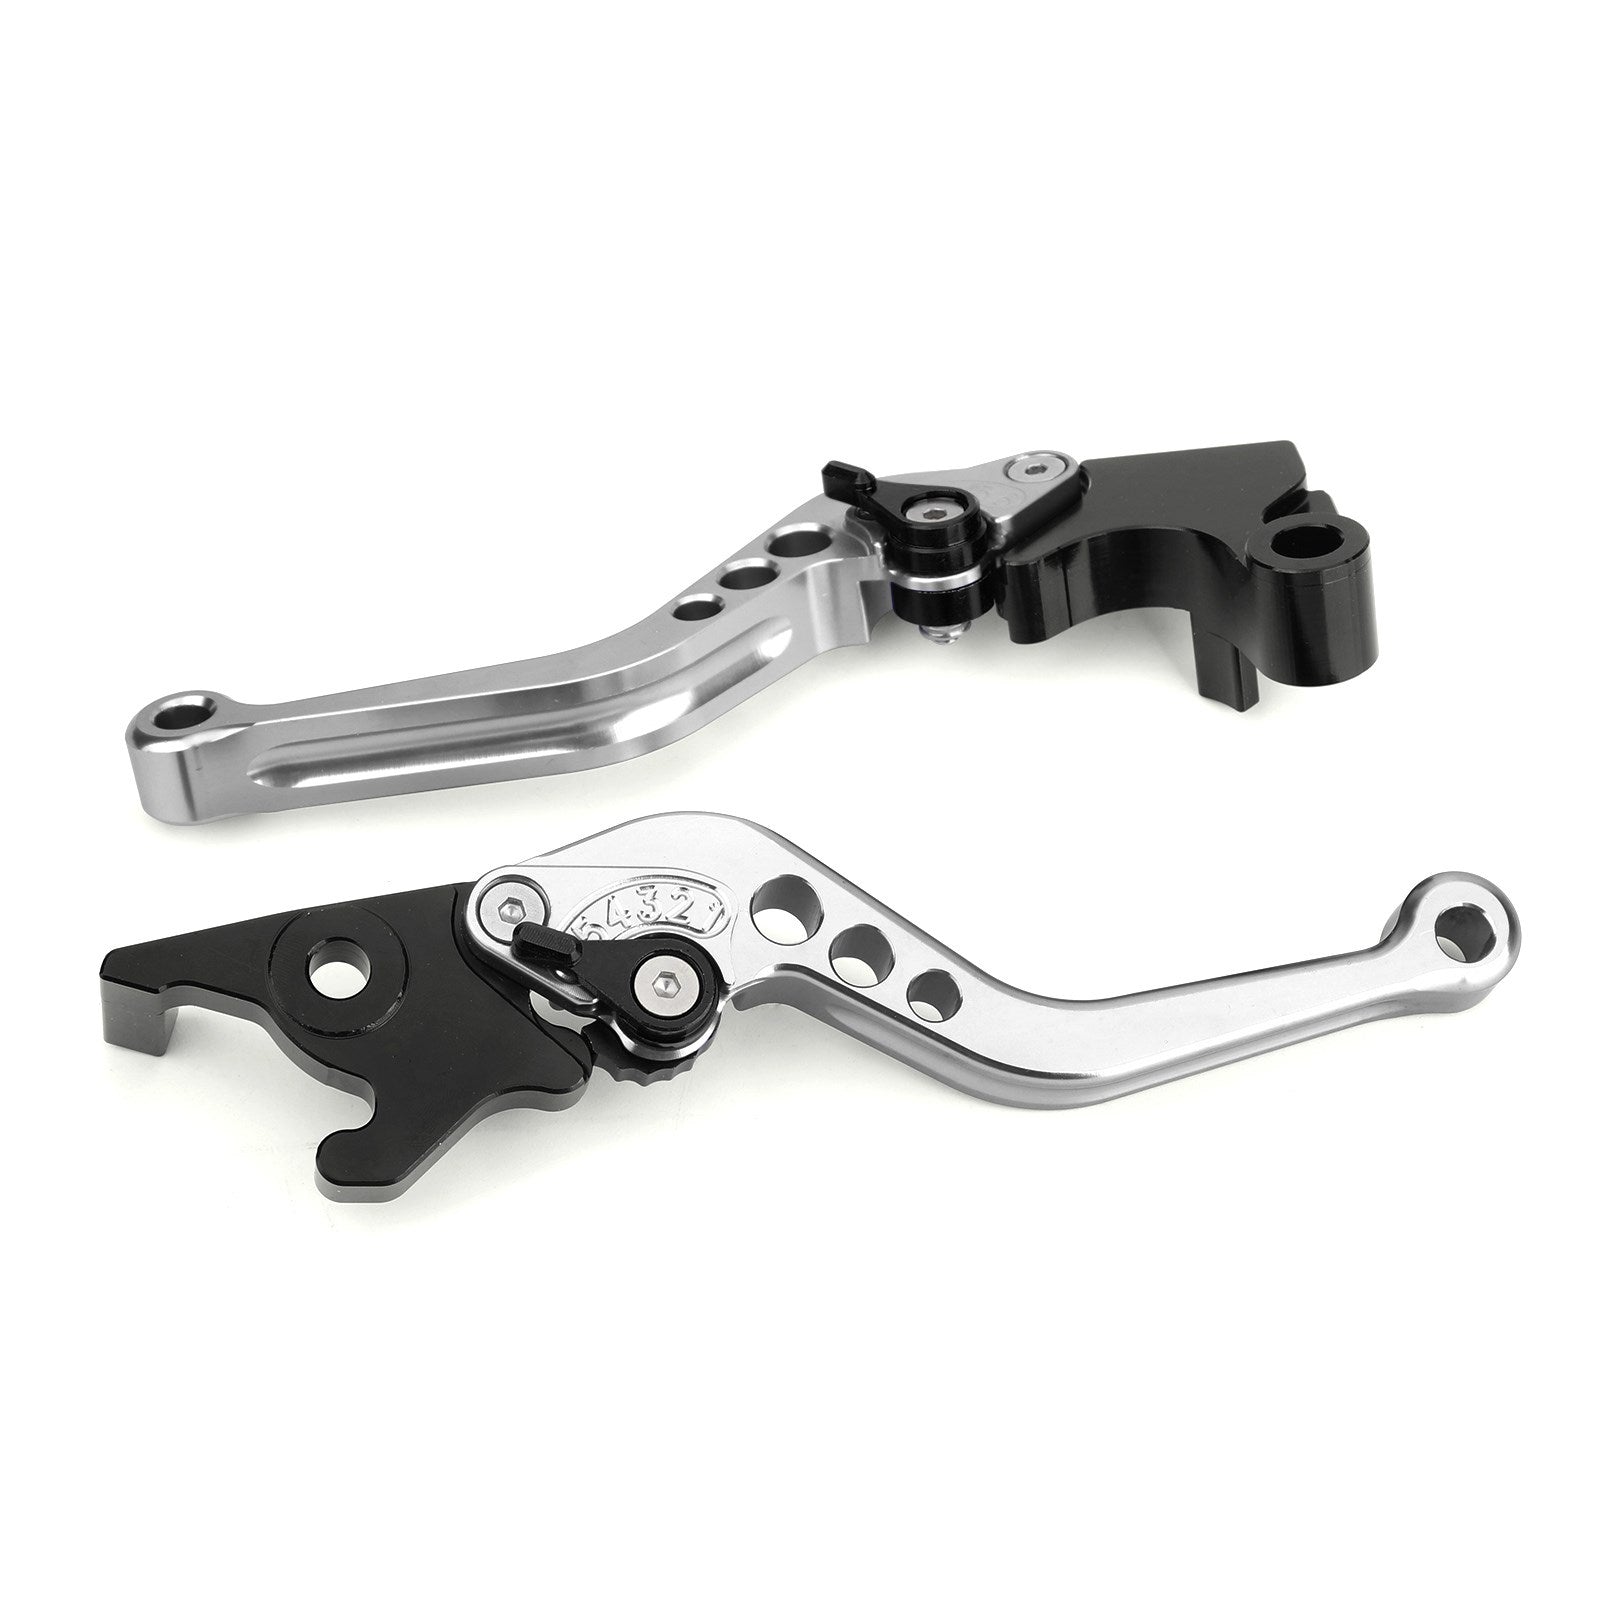 Brake Clutch Levers For YAMAHA YZF R3 R25 MT 25 2015-2017 Silver